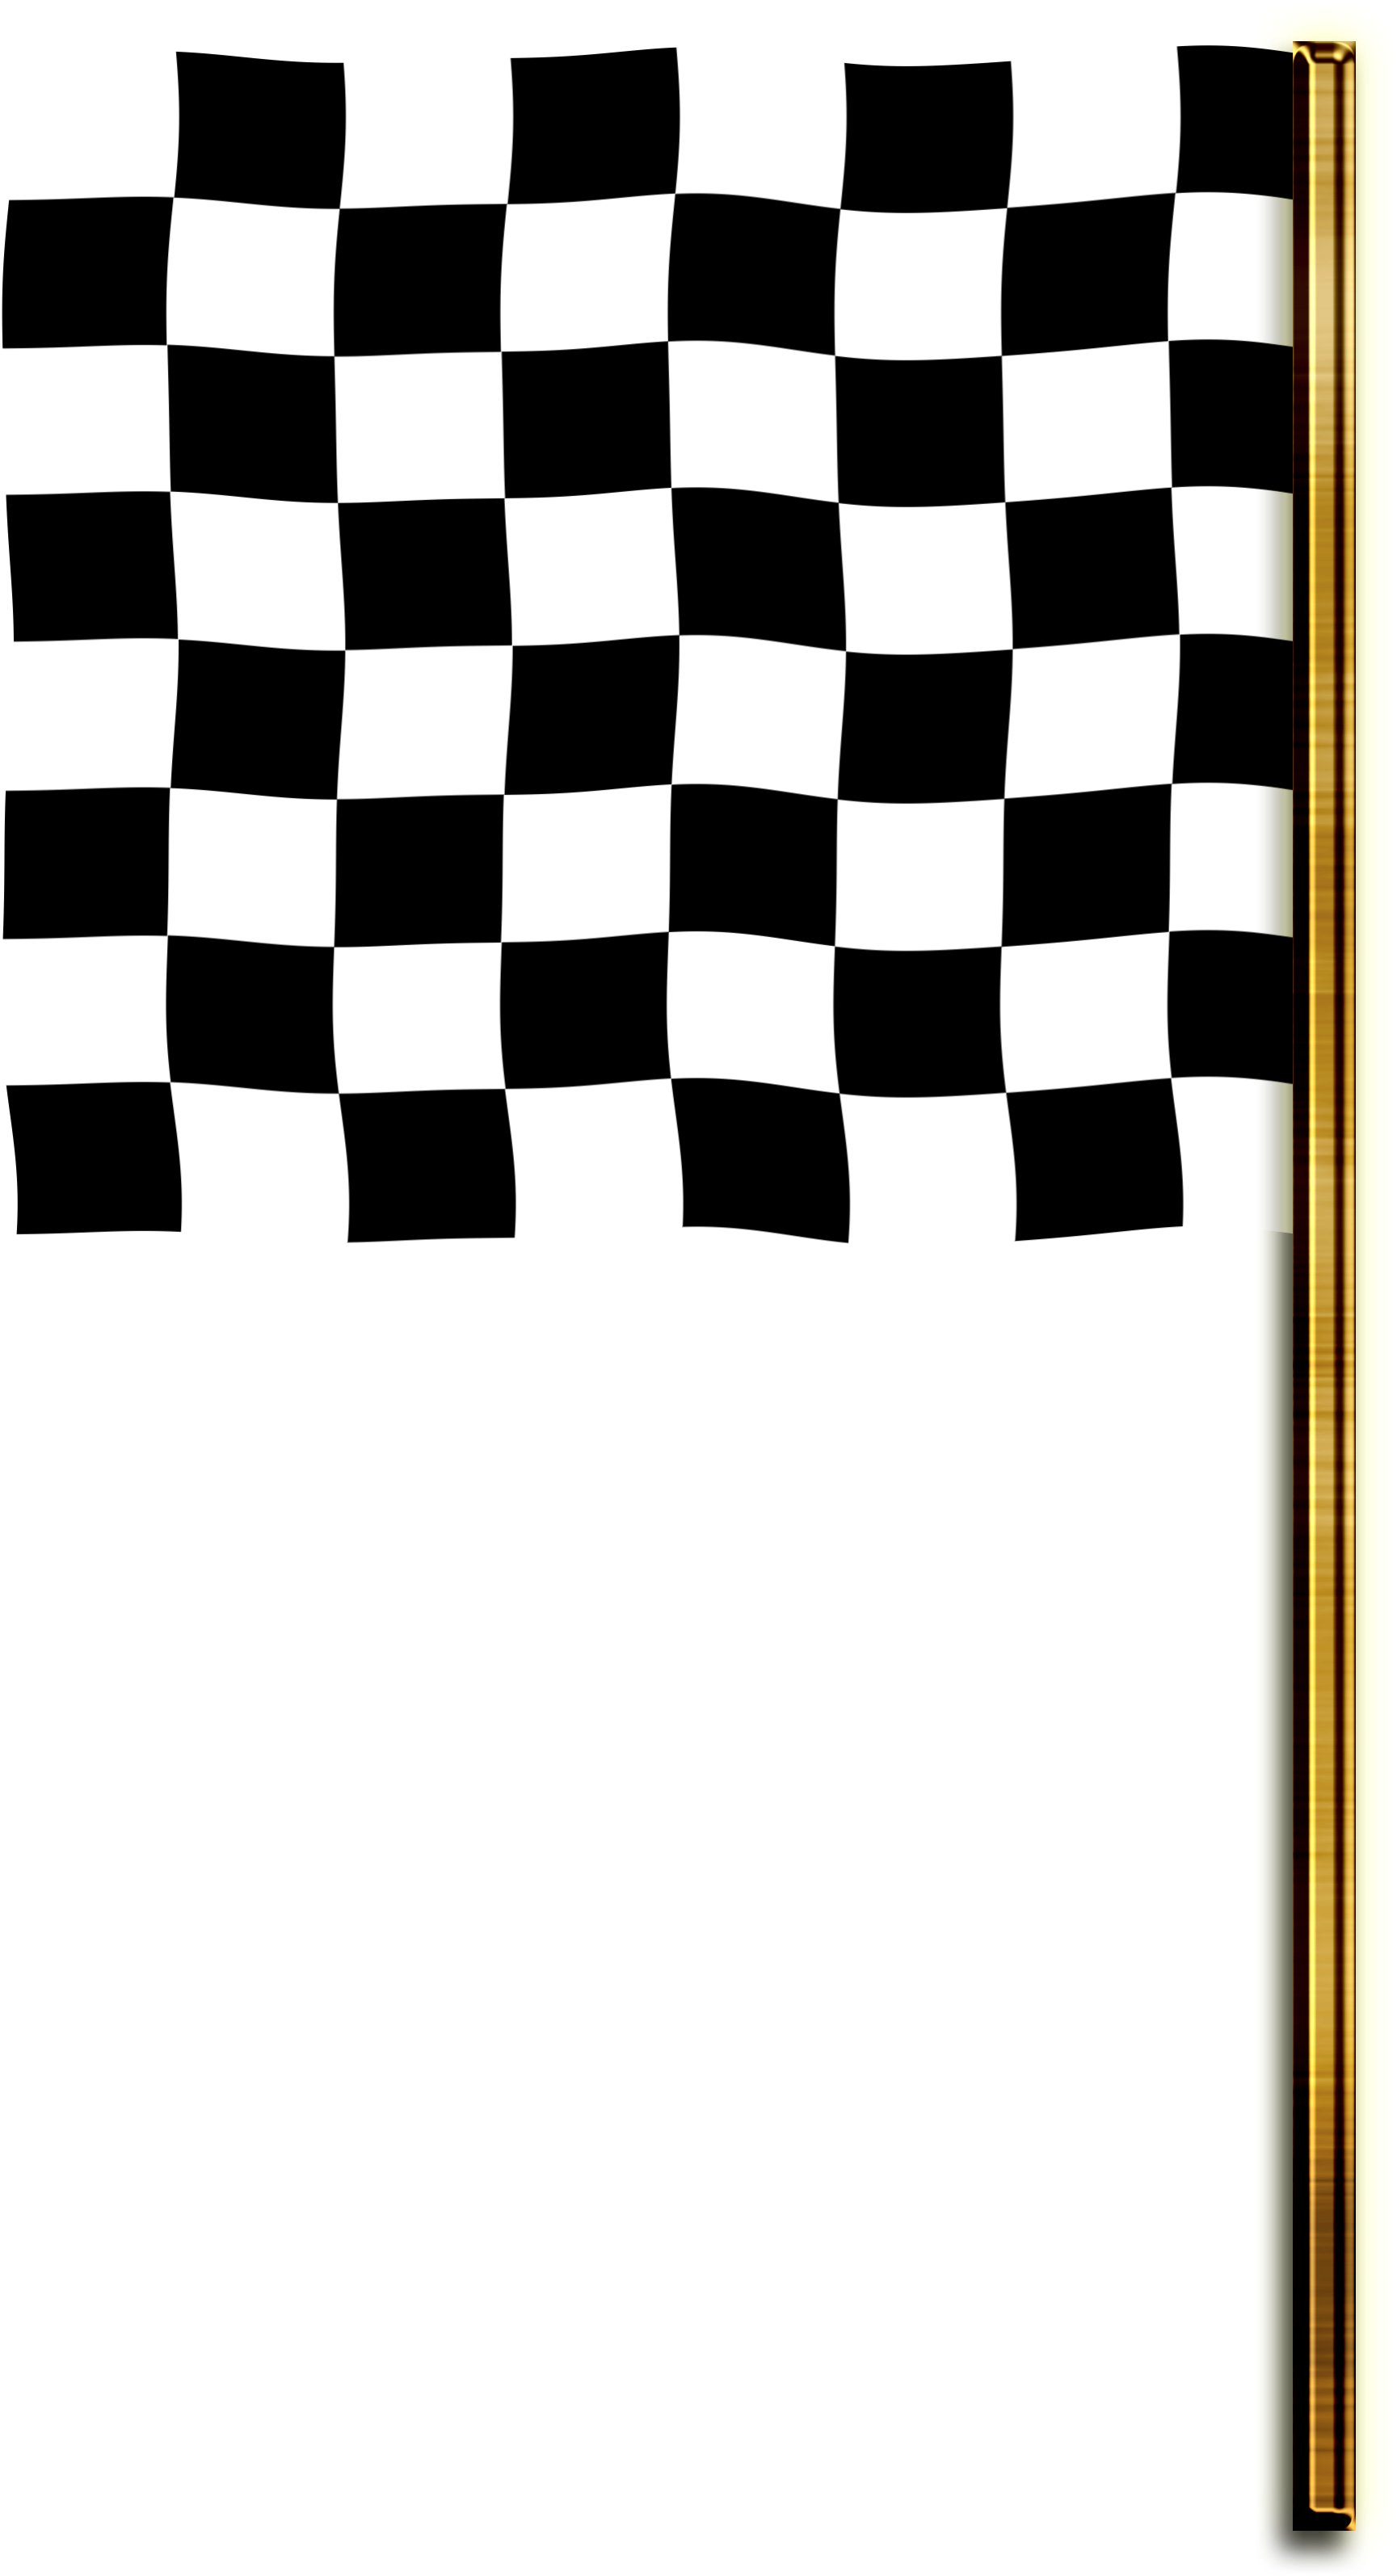 Race Clipart To Finish - Standard Chess Board (2580x3540)